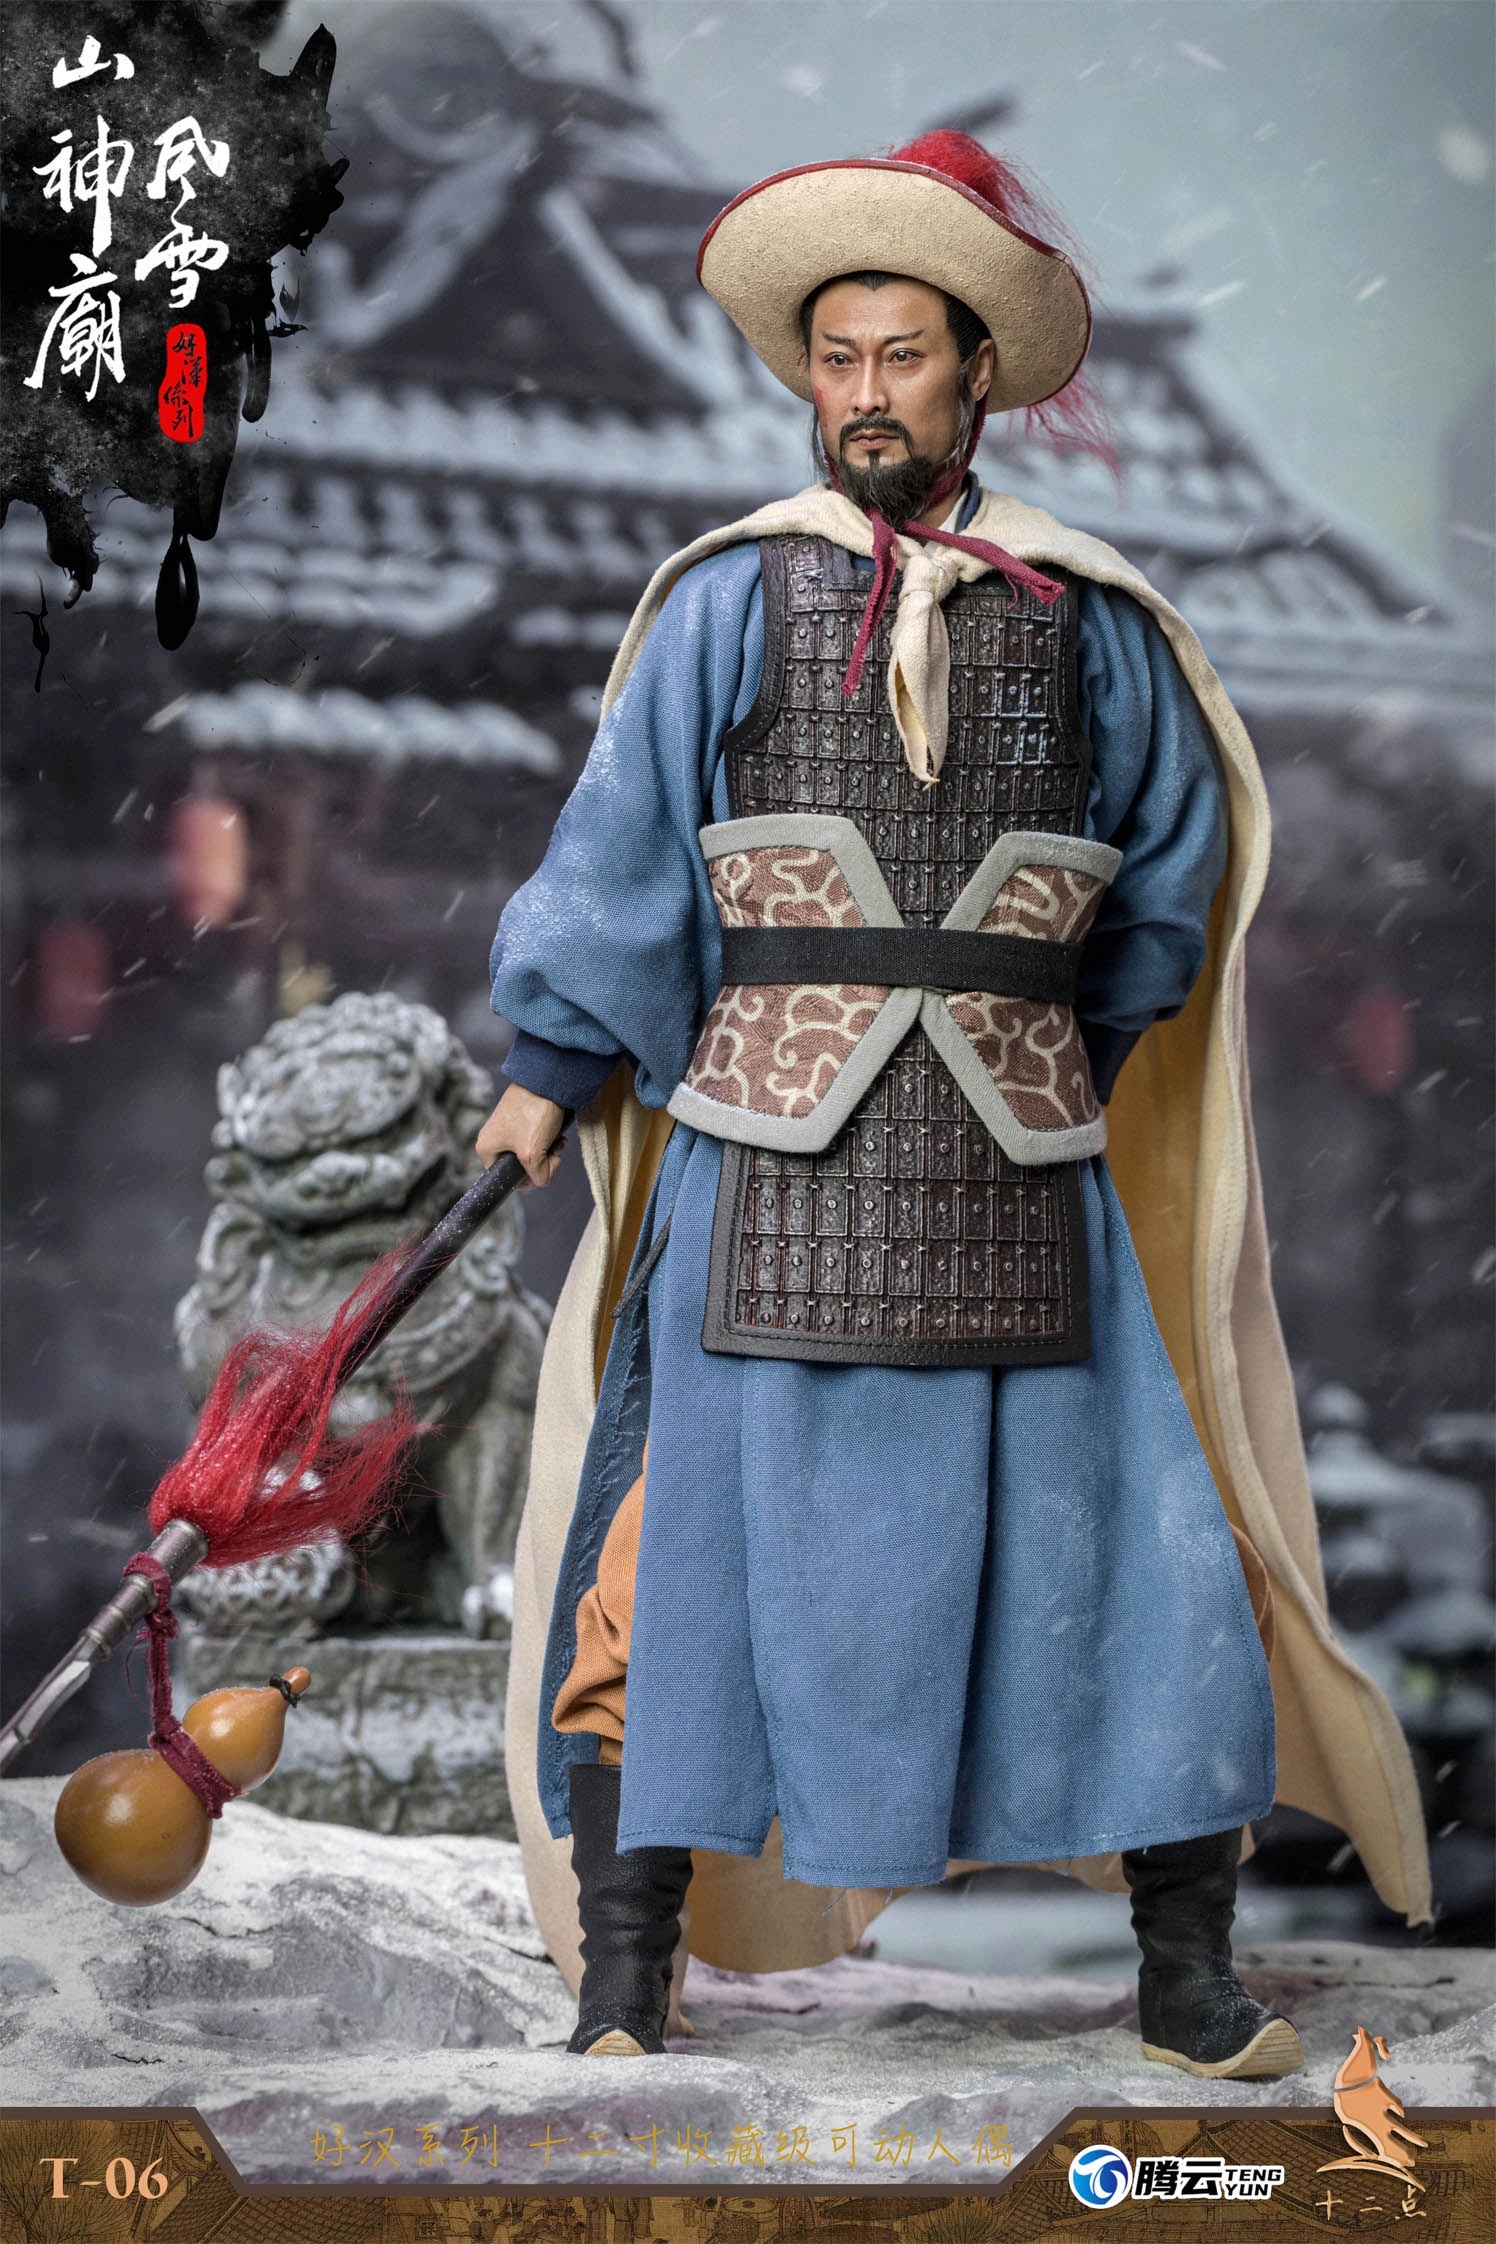 NEW PRODUCT: Twelve - Hero Series - Leopard Head Lin Chong Fengxue Mountain Temple Action Figure (T-05 /T-06) 2236